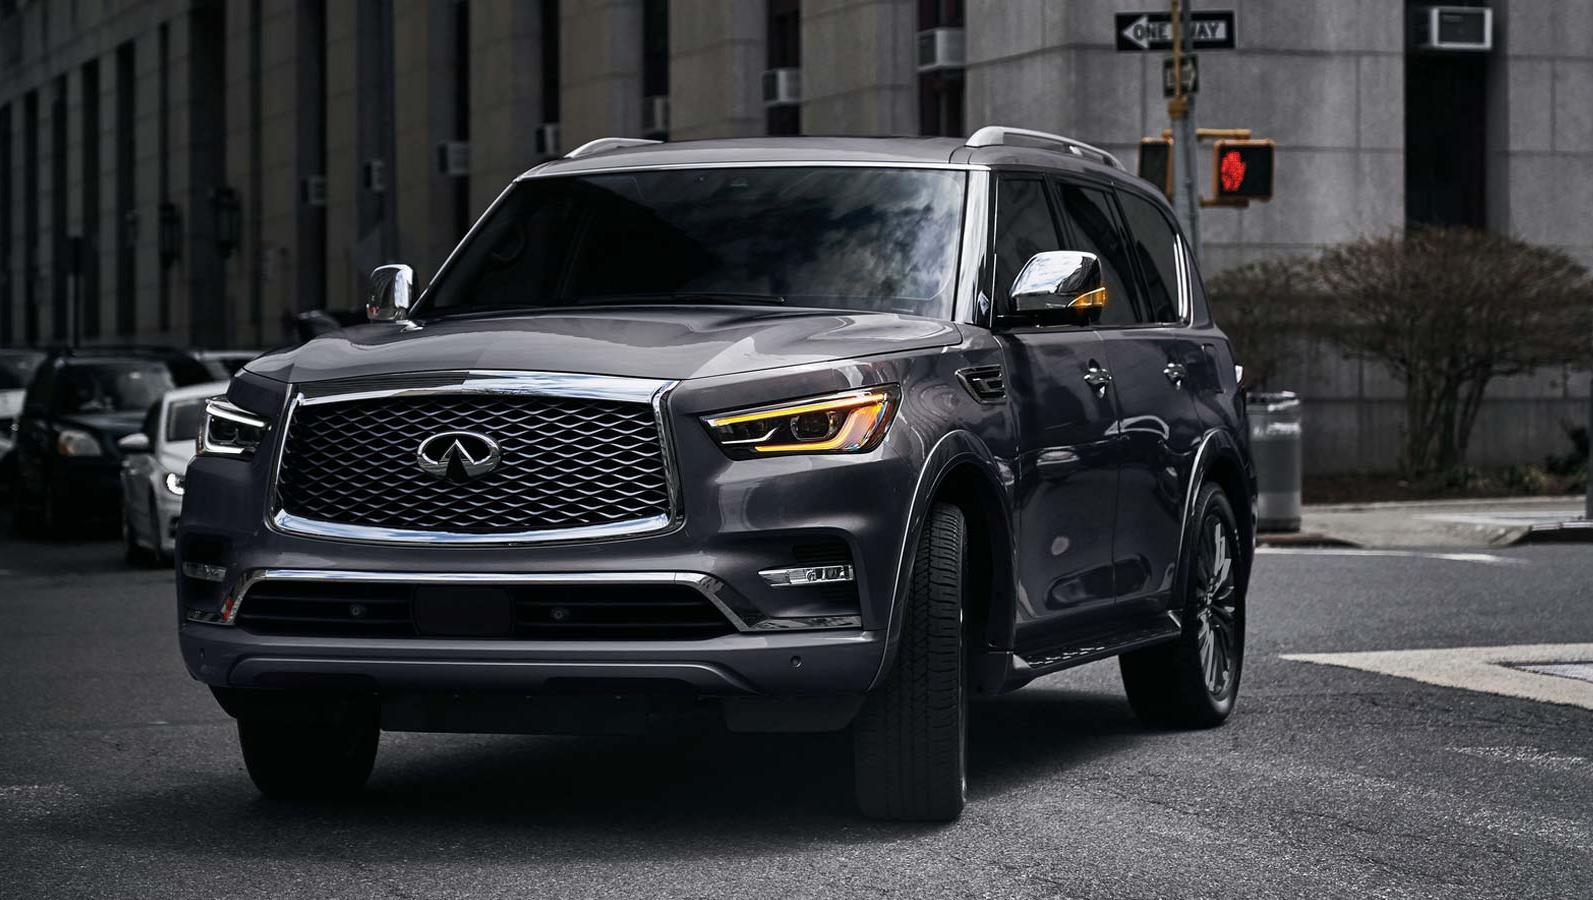 2023 QX80 Gray Exterior shot in the city 